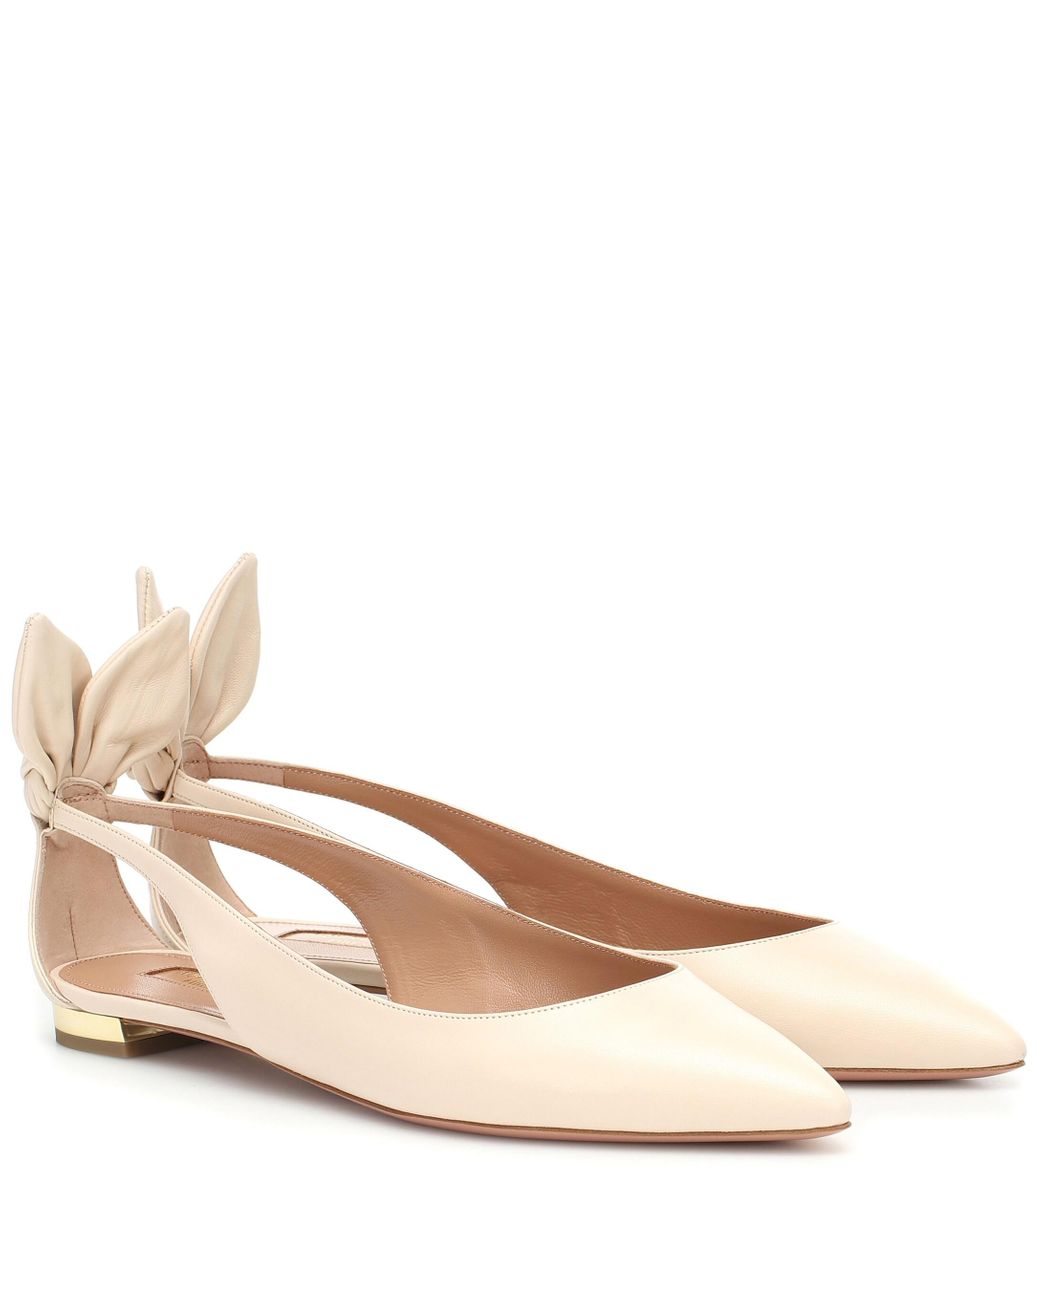 Aquazzura Bow Tie Leather Ballet Flats in Natural | Lyst